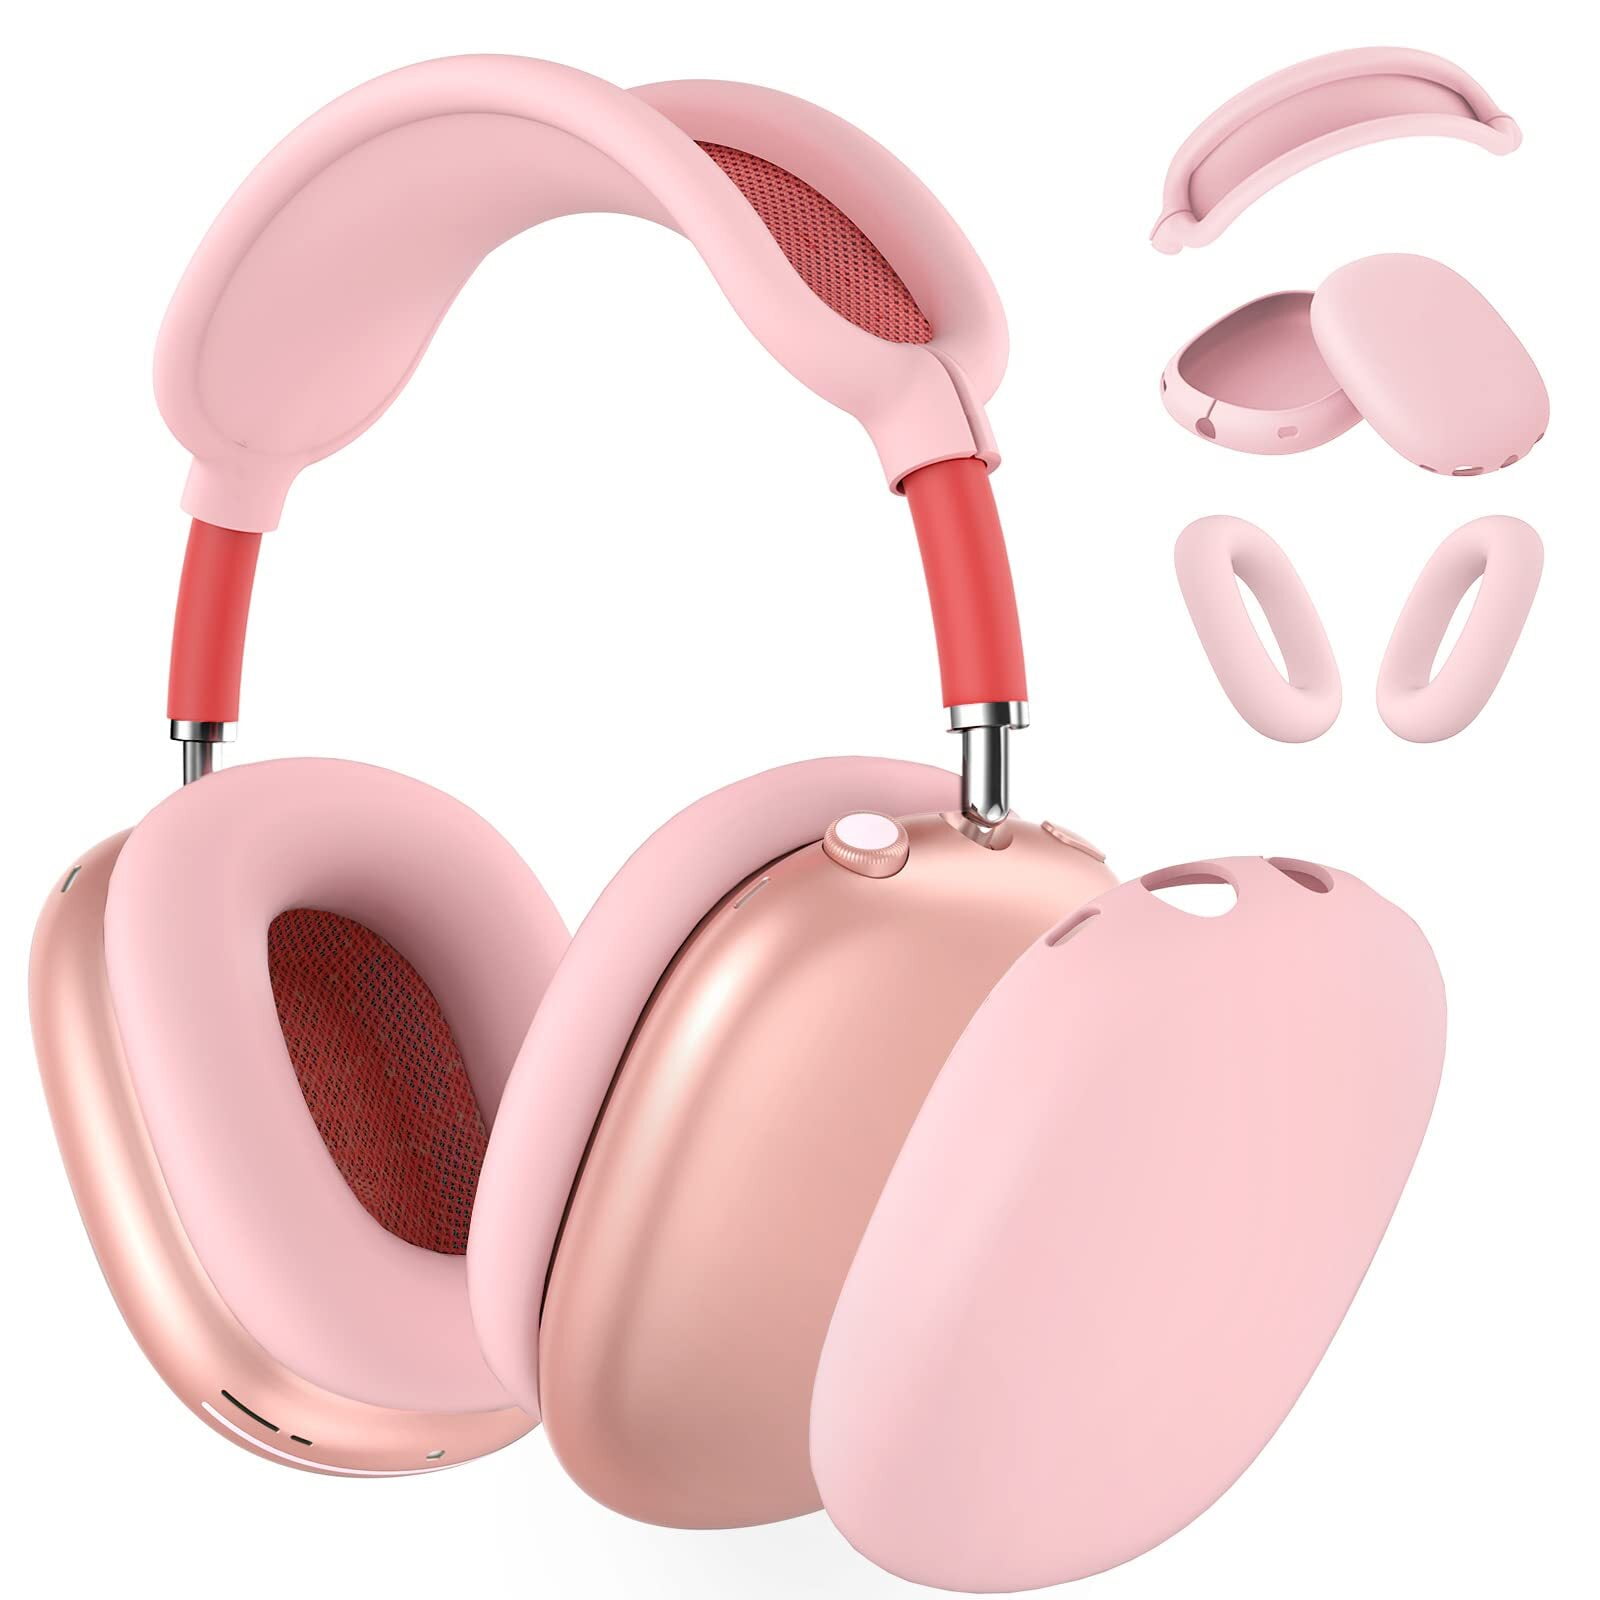 [2 Sets] Case for AirPods Max Ear Cups Cover & Headband Cover, Soft  Silicone Anti-Scratch/Dust-Proof Earphone Earpad Cover & Headband Cushion  for